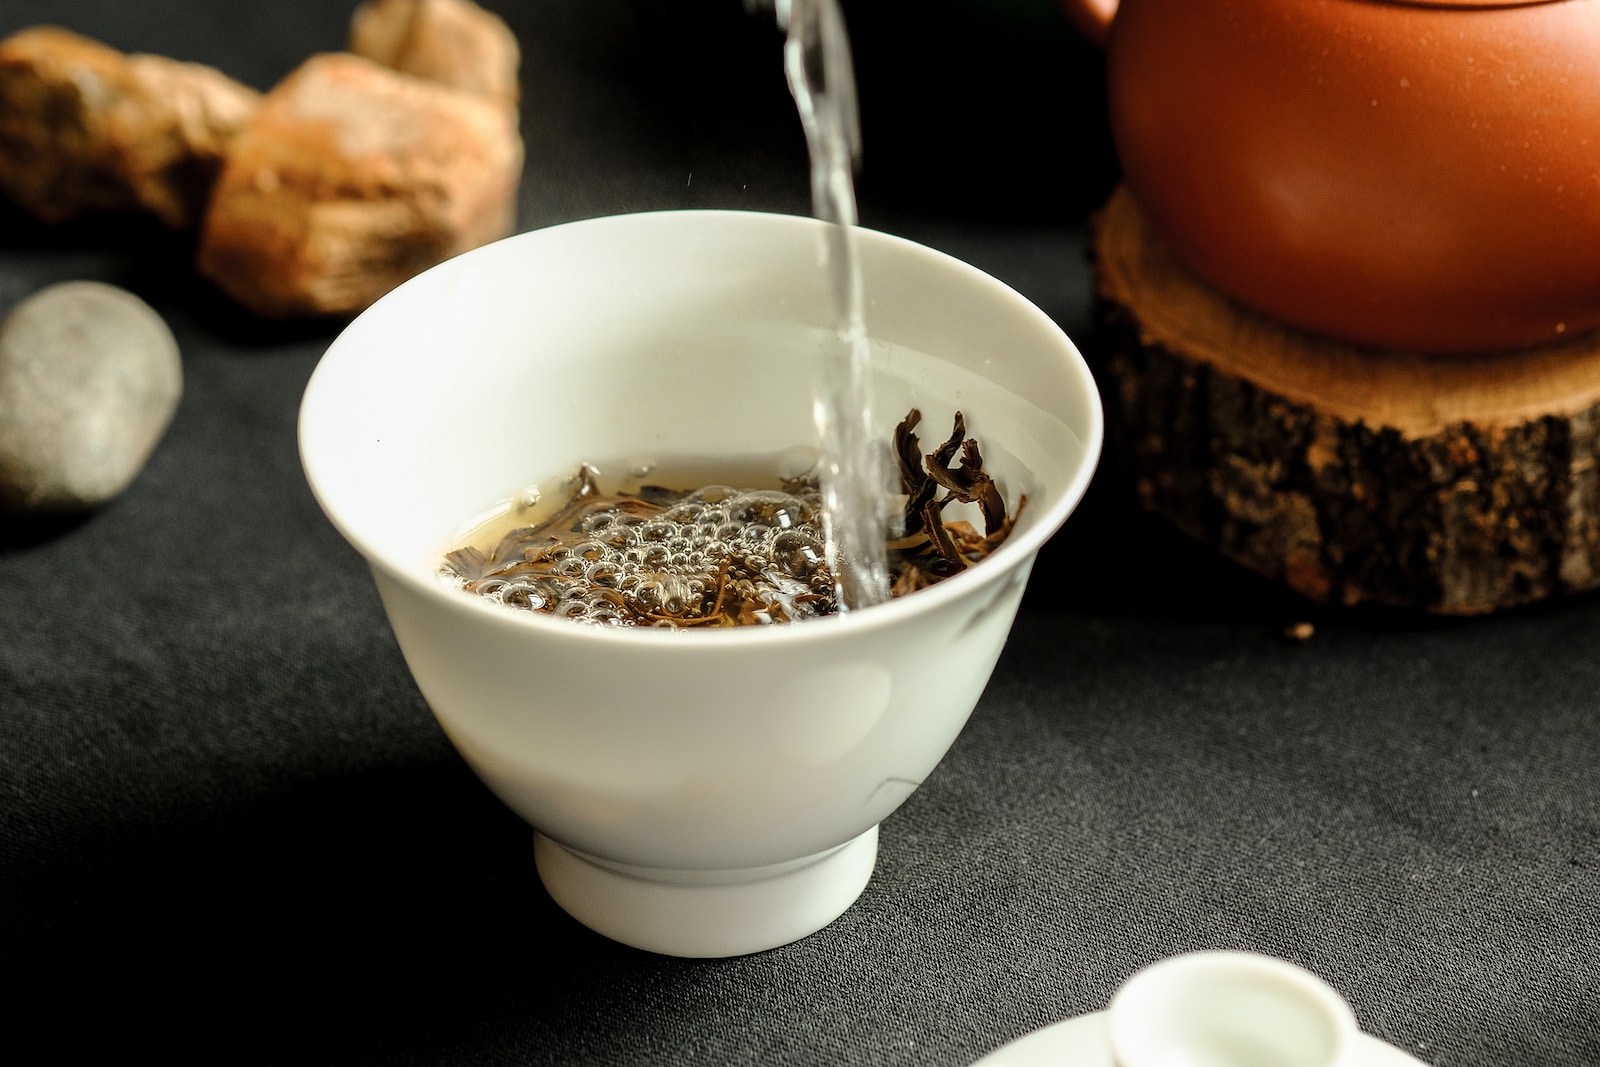 Chinese Tea in a white ceramic bowl with silver spoon